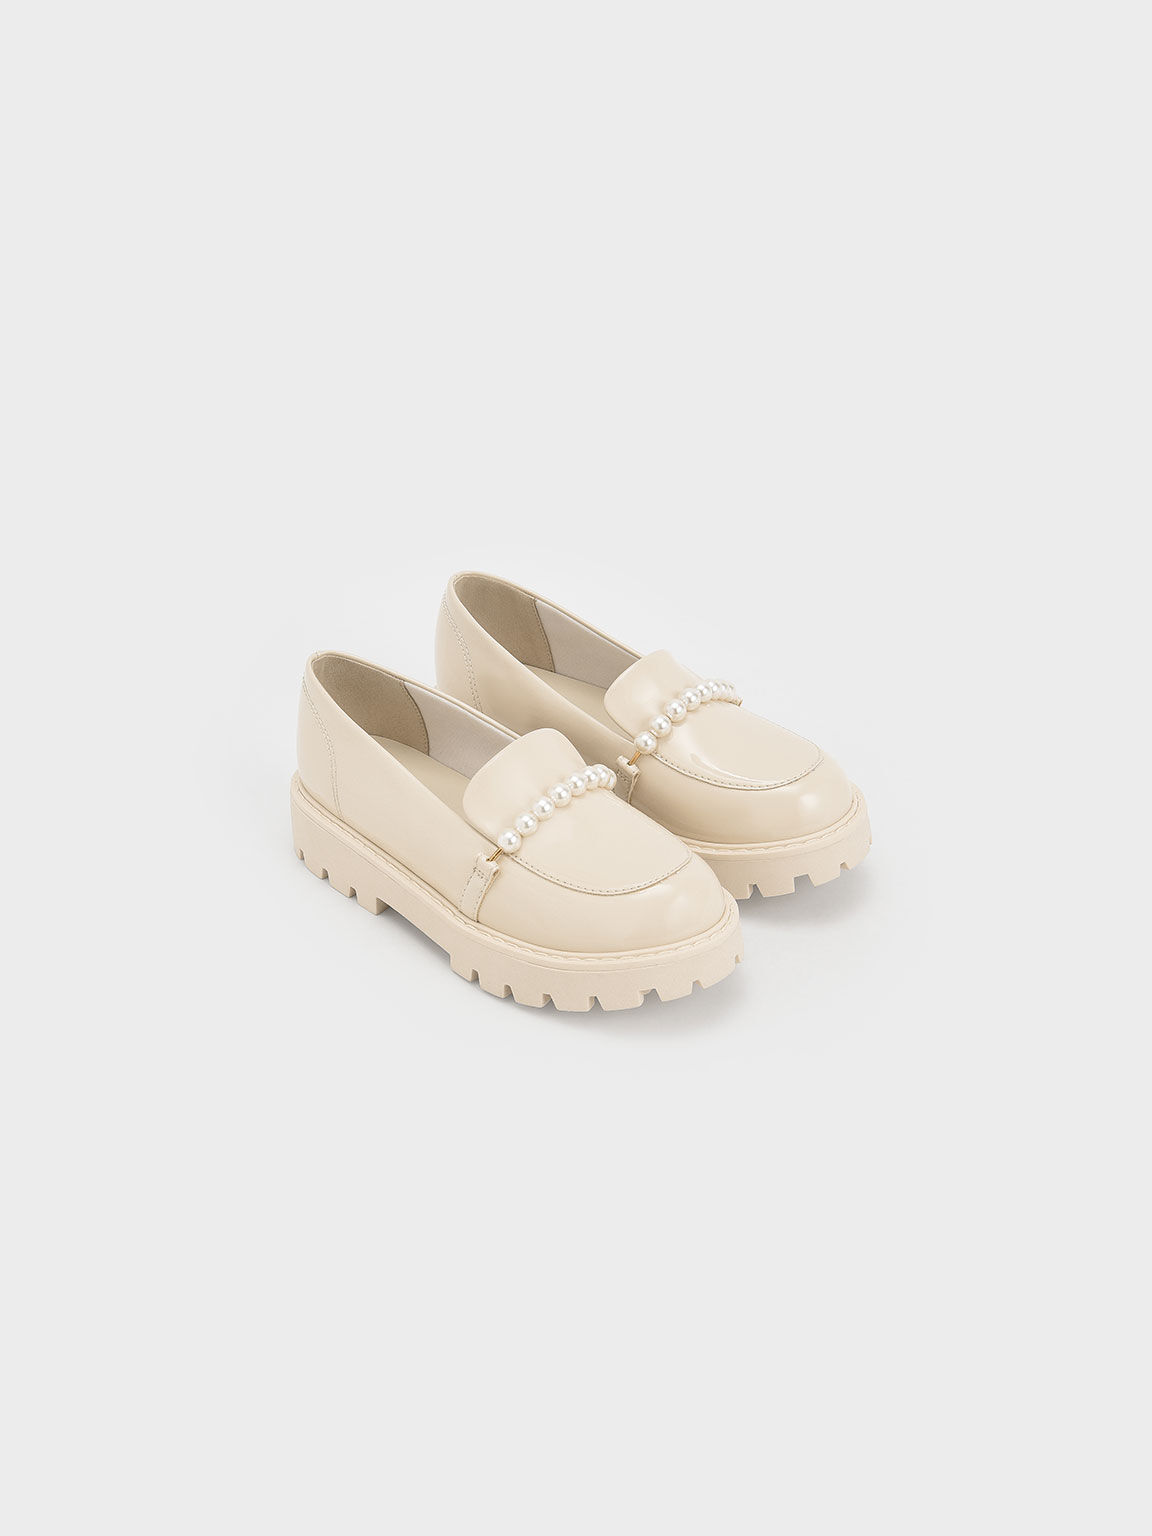 Girls' Patent Pearl-Embellished Loafers, Cream, hi-res